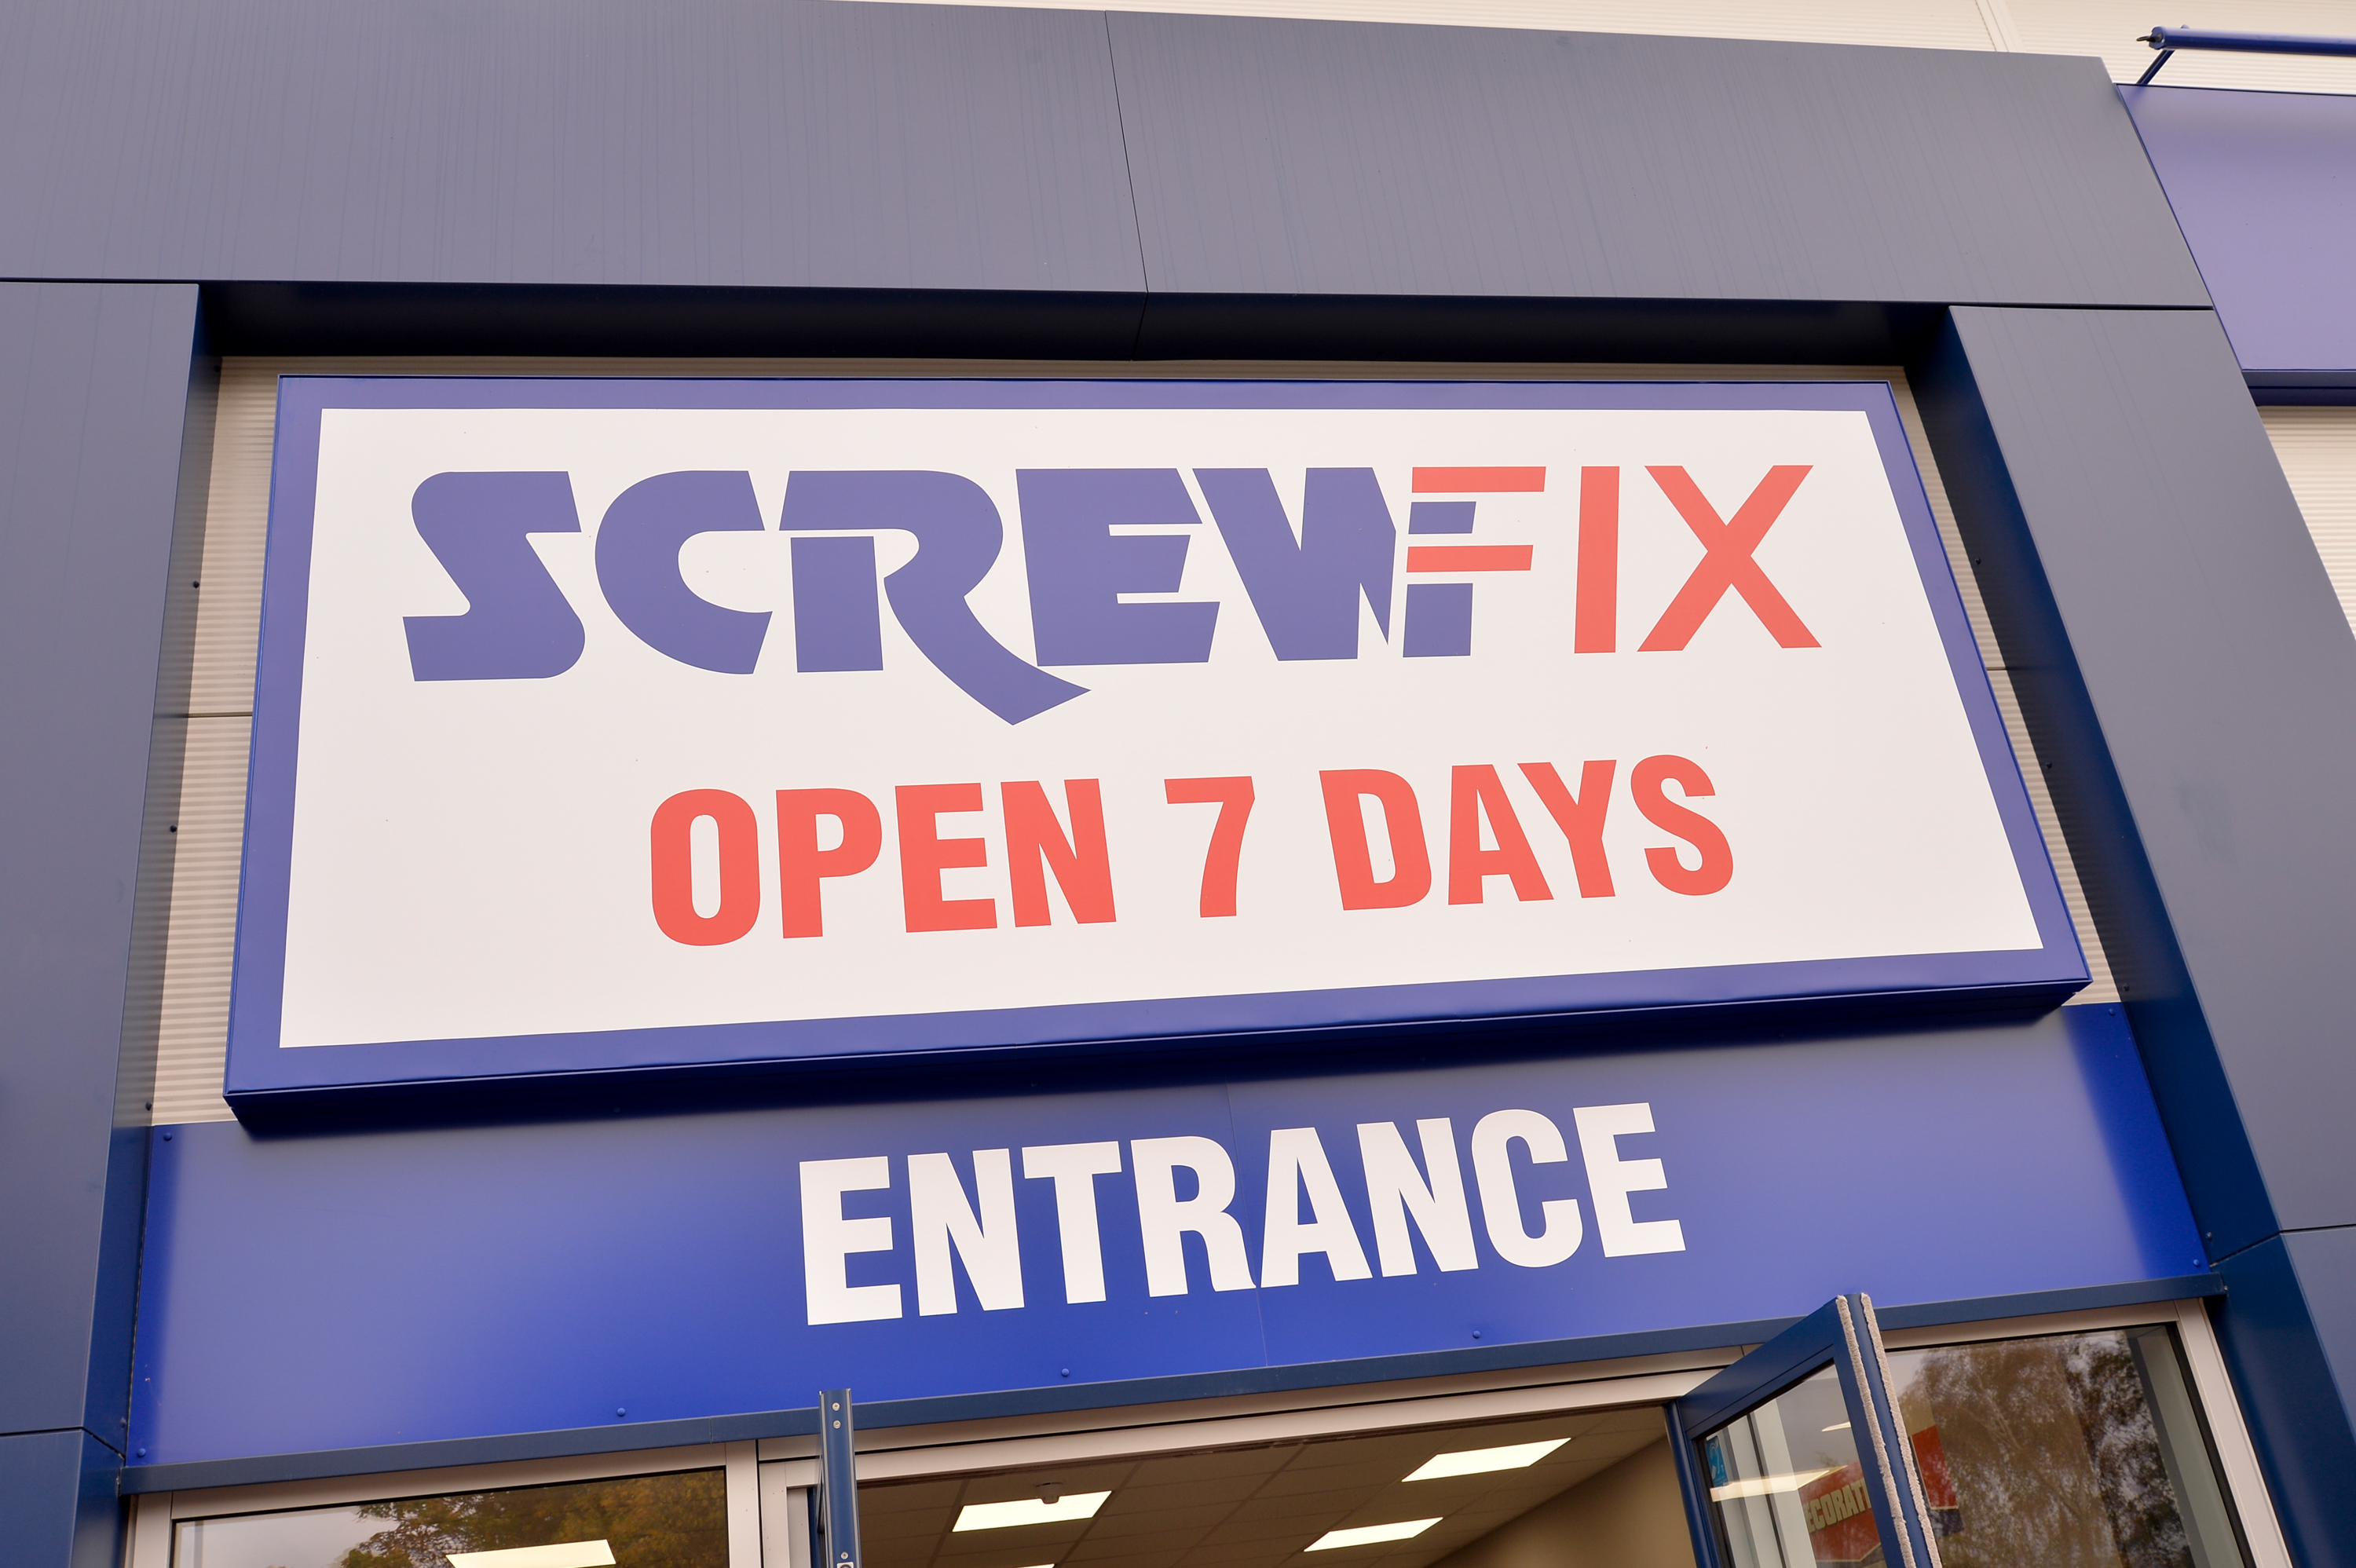 East Grinstead’s first Screwfix store to open on 22nd October